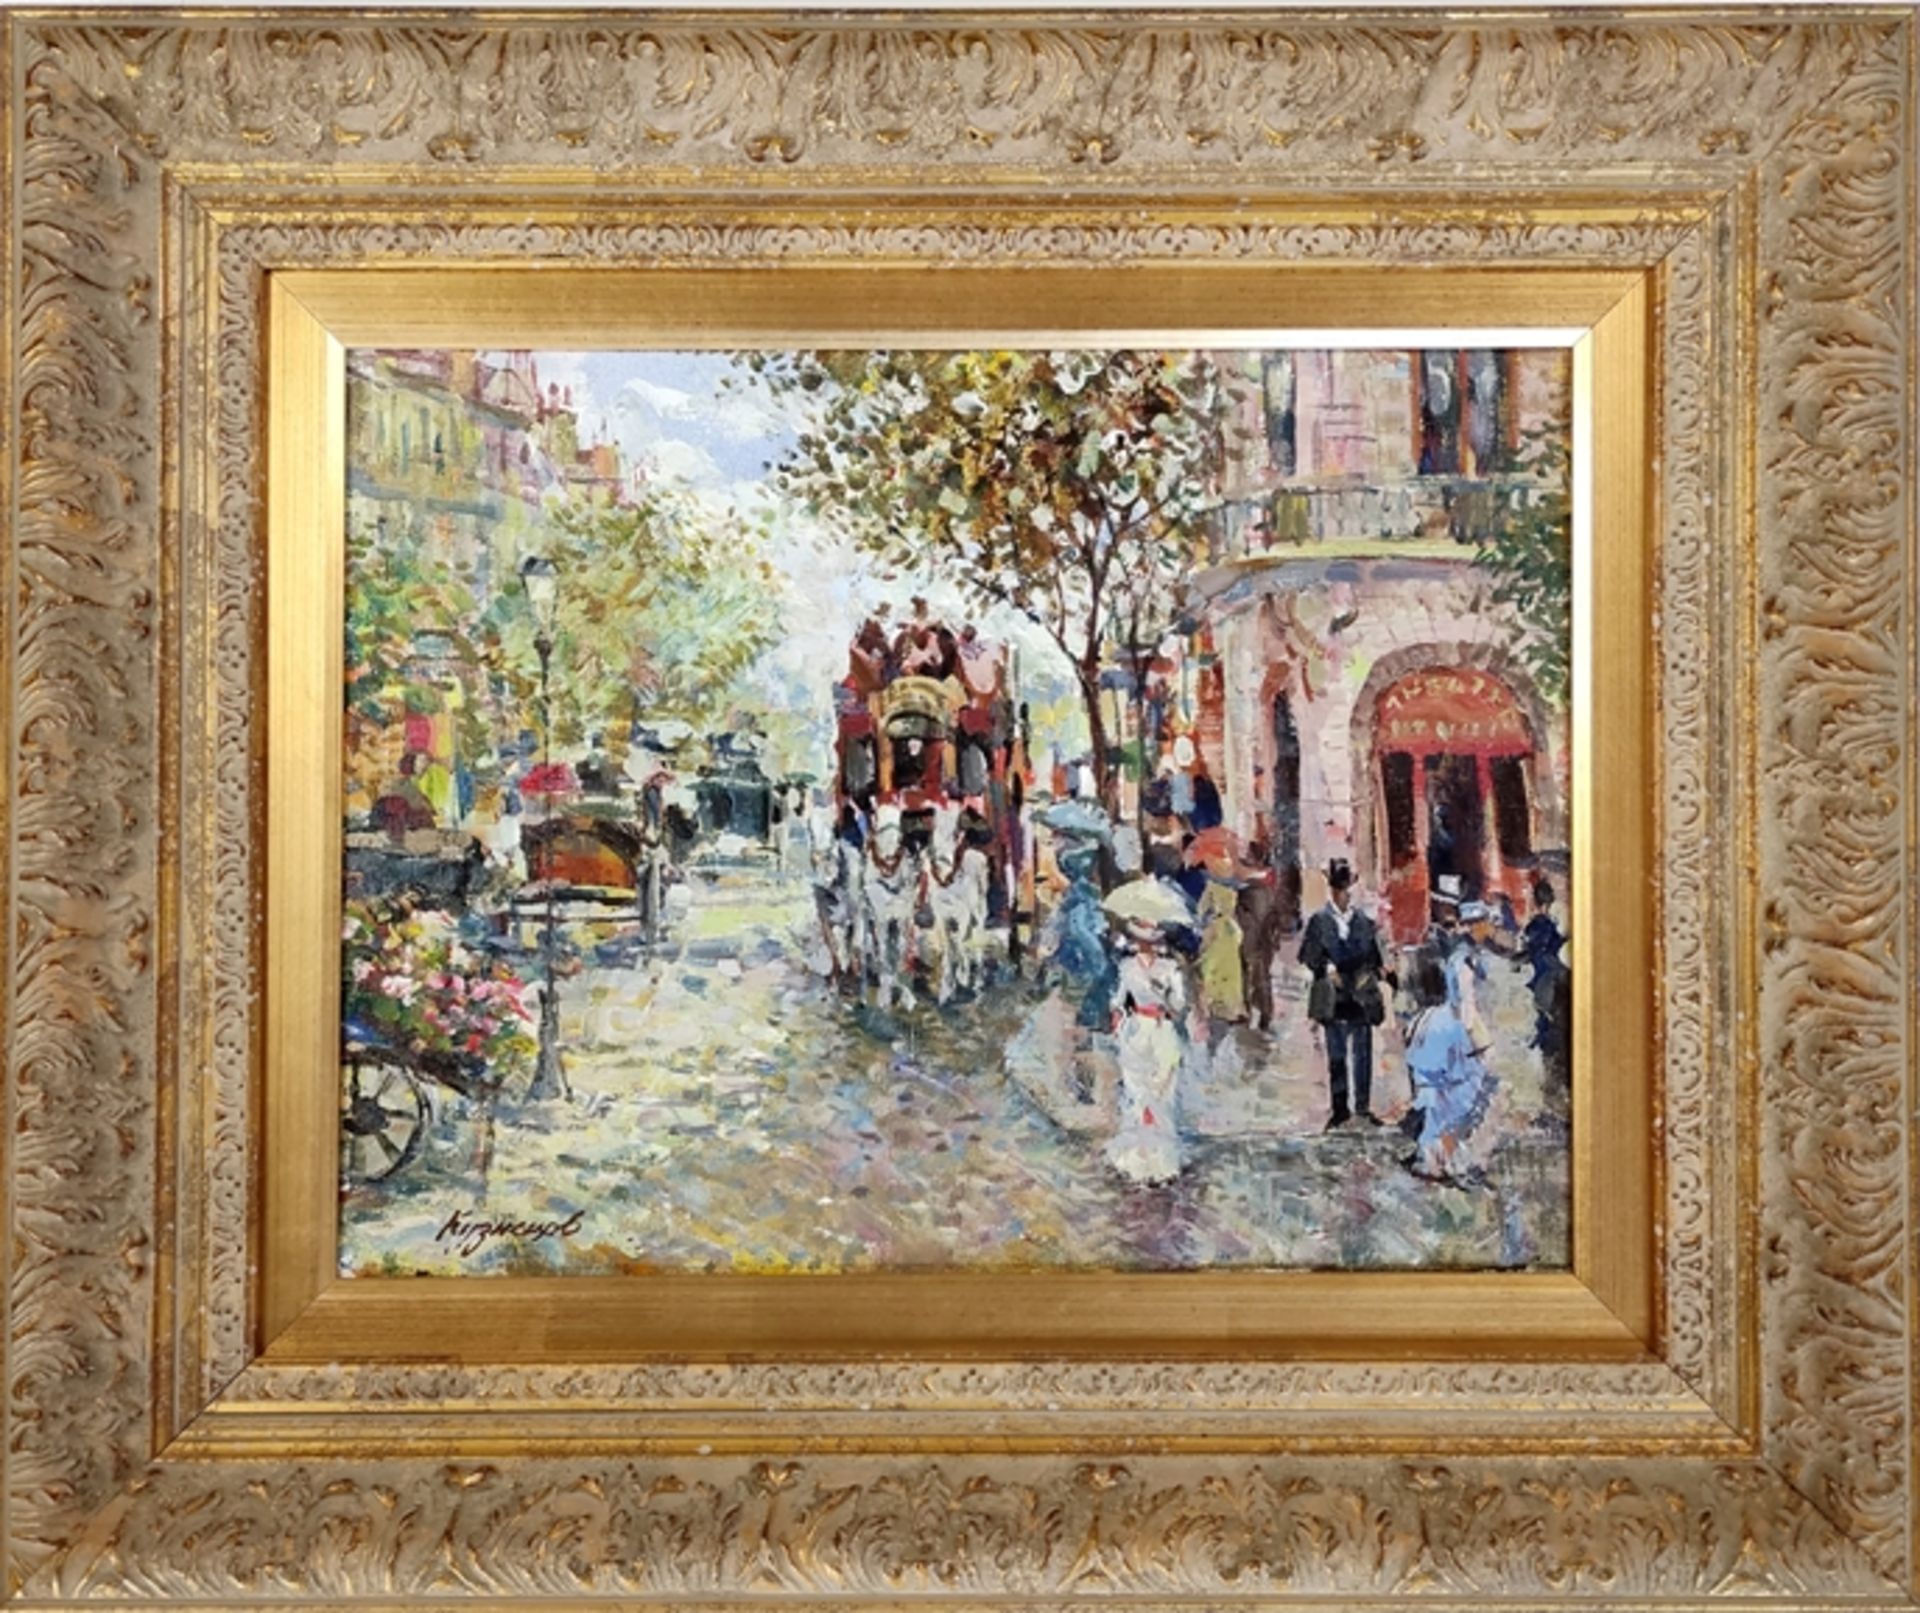 Kuznetsov, Alexander (1957) "Street View", probably France, in impressionist manner, oil on canvas, - Image 2 of 4